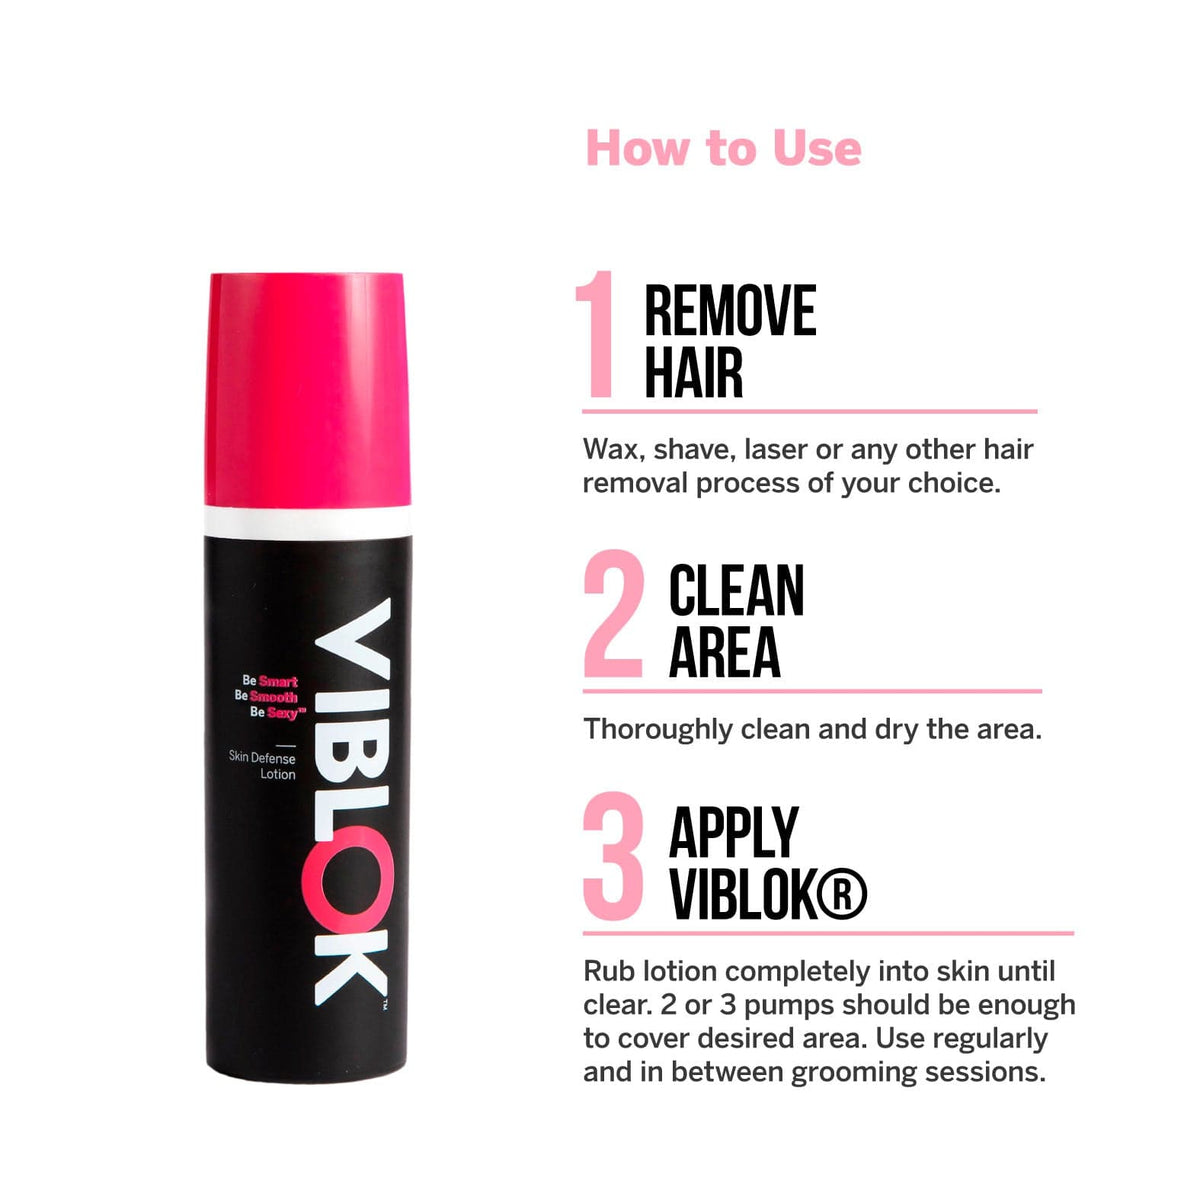 Description of 'How to Use' step-by-step of the lotion. Remove hair, clean area, apply lotion.